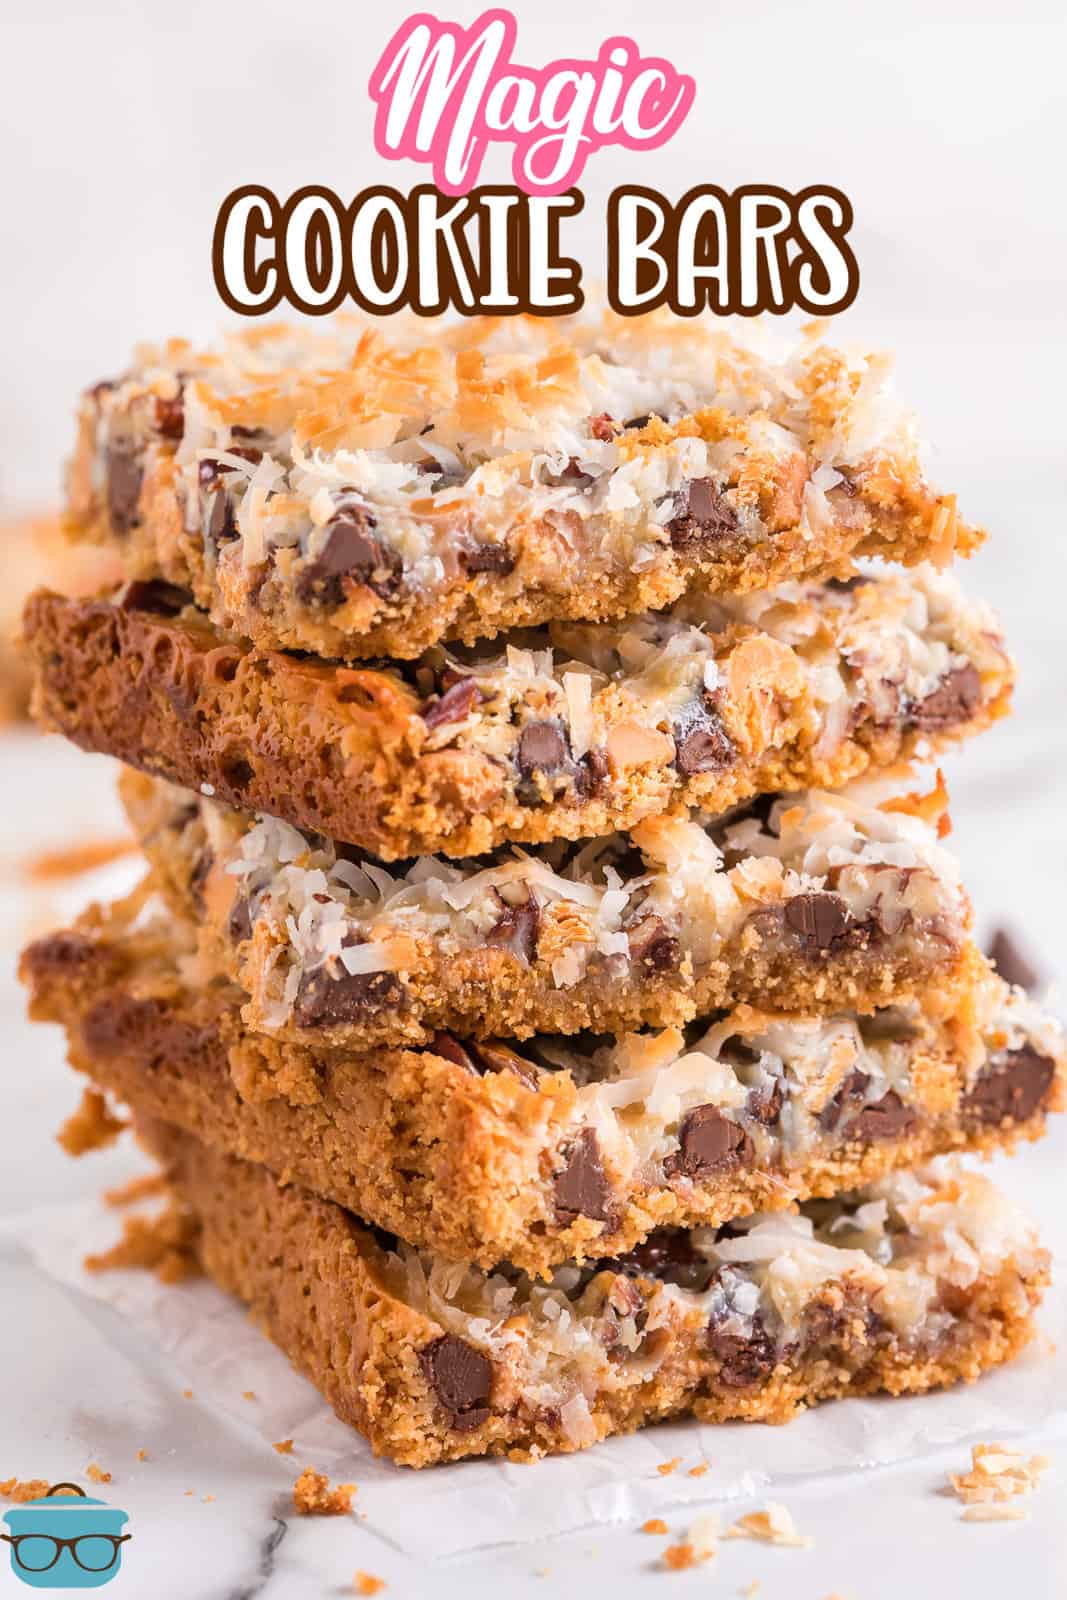 A stack of Magic Cookie bars.